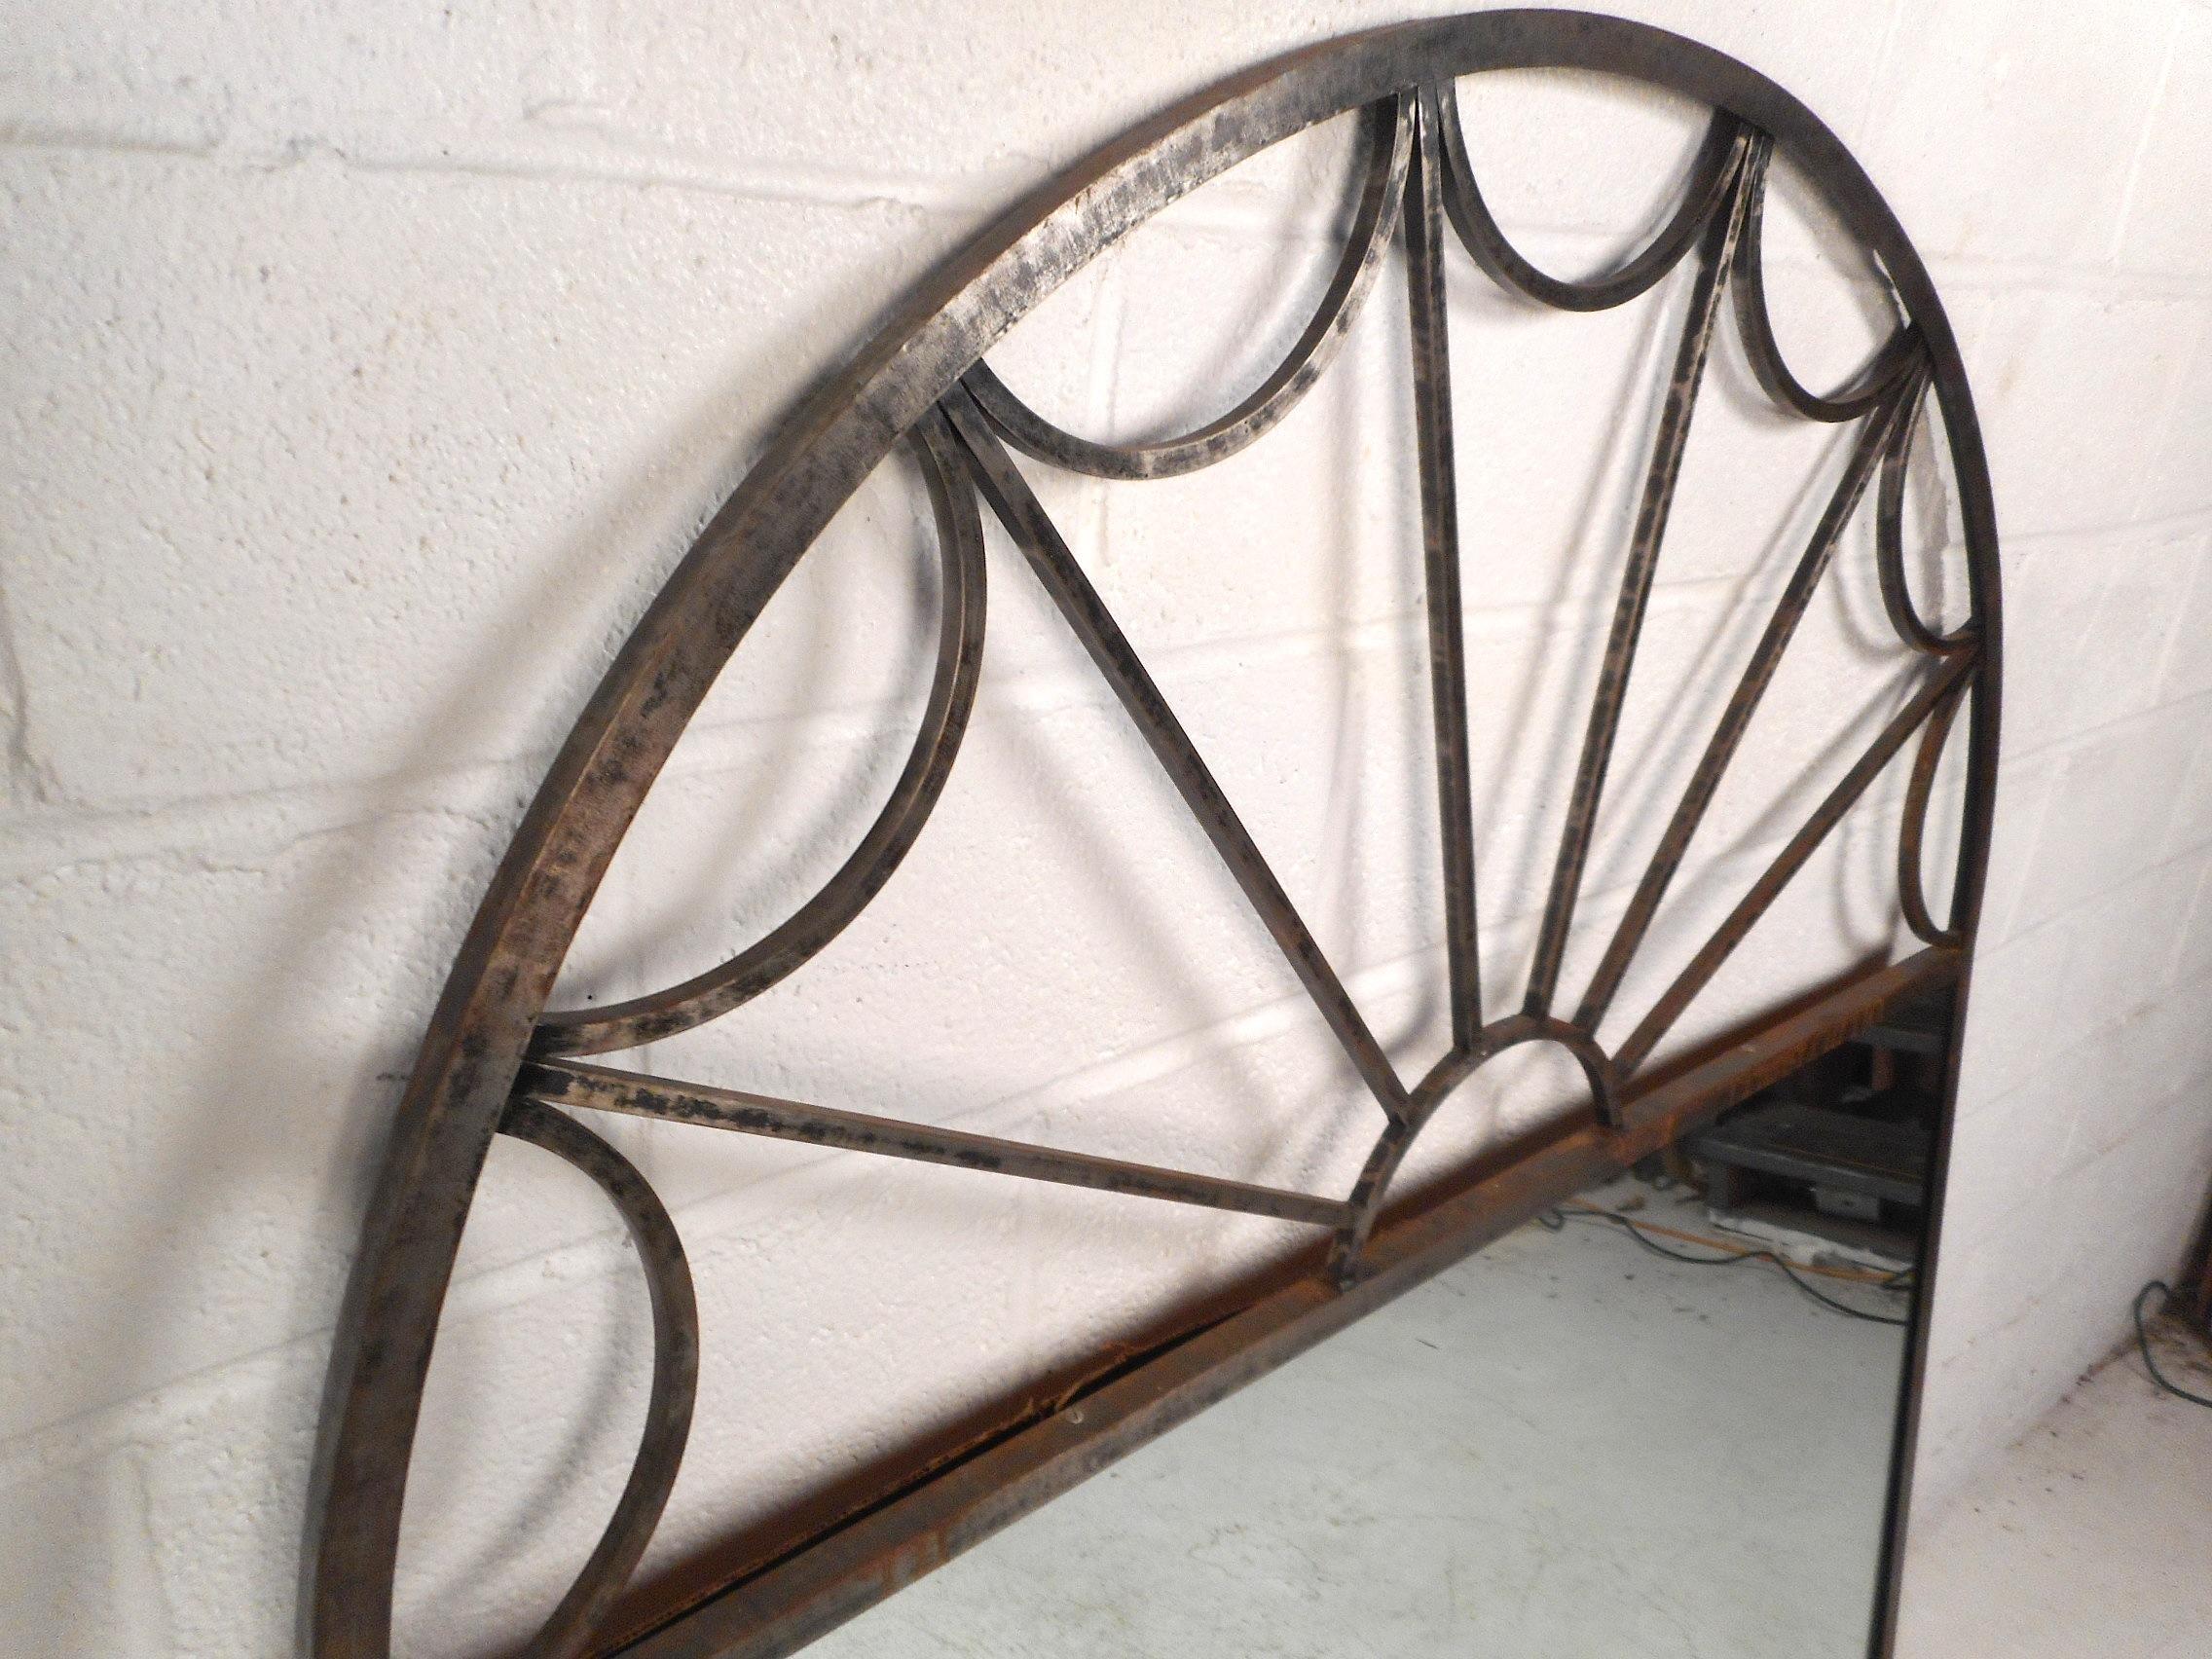 20th Century Large Mirror with Arched Iron Frame